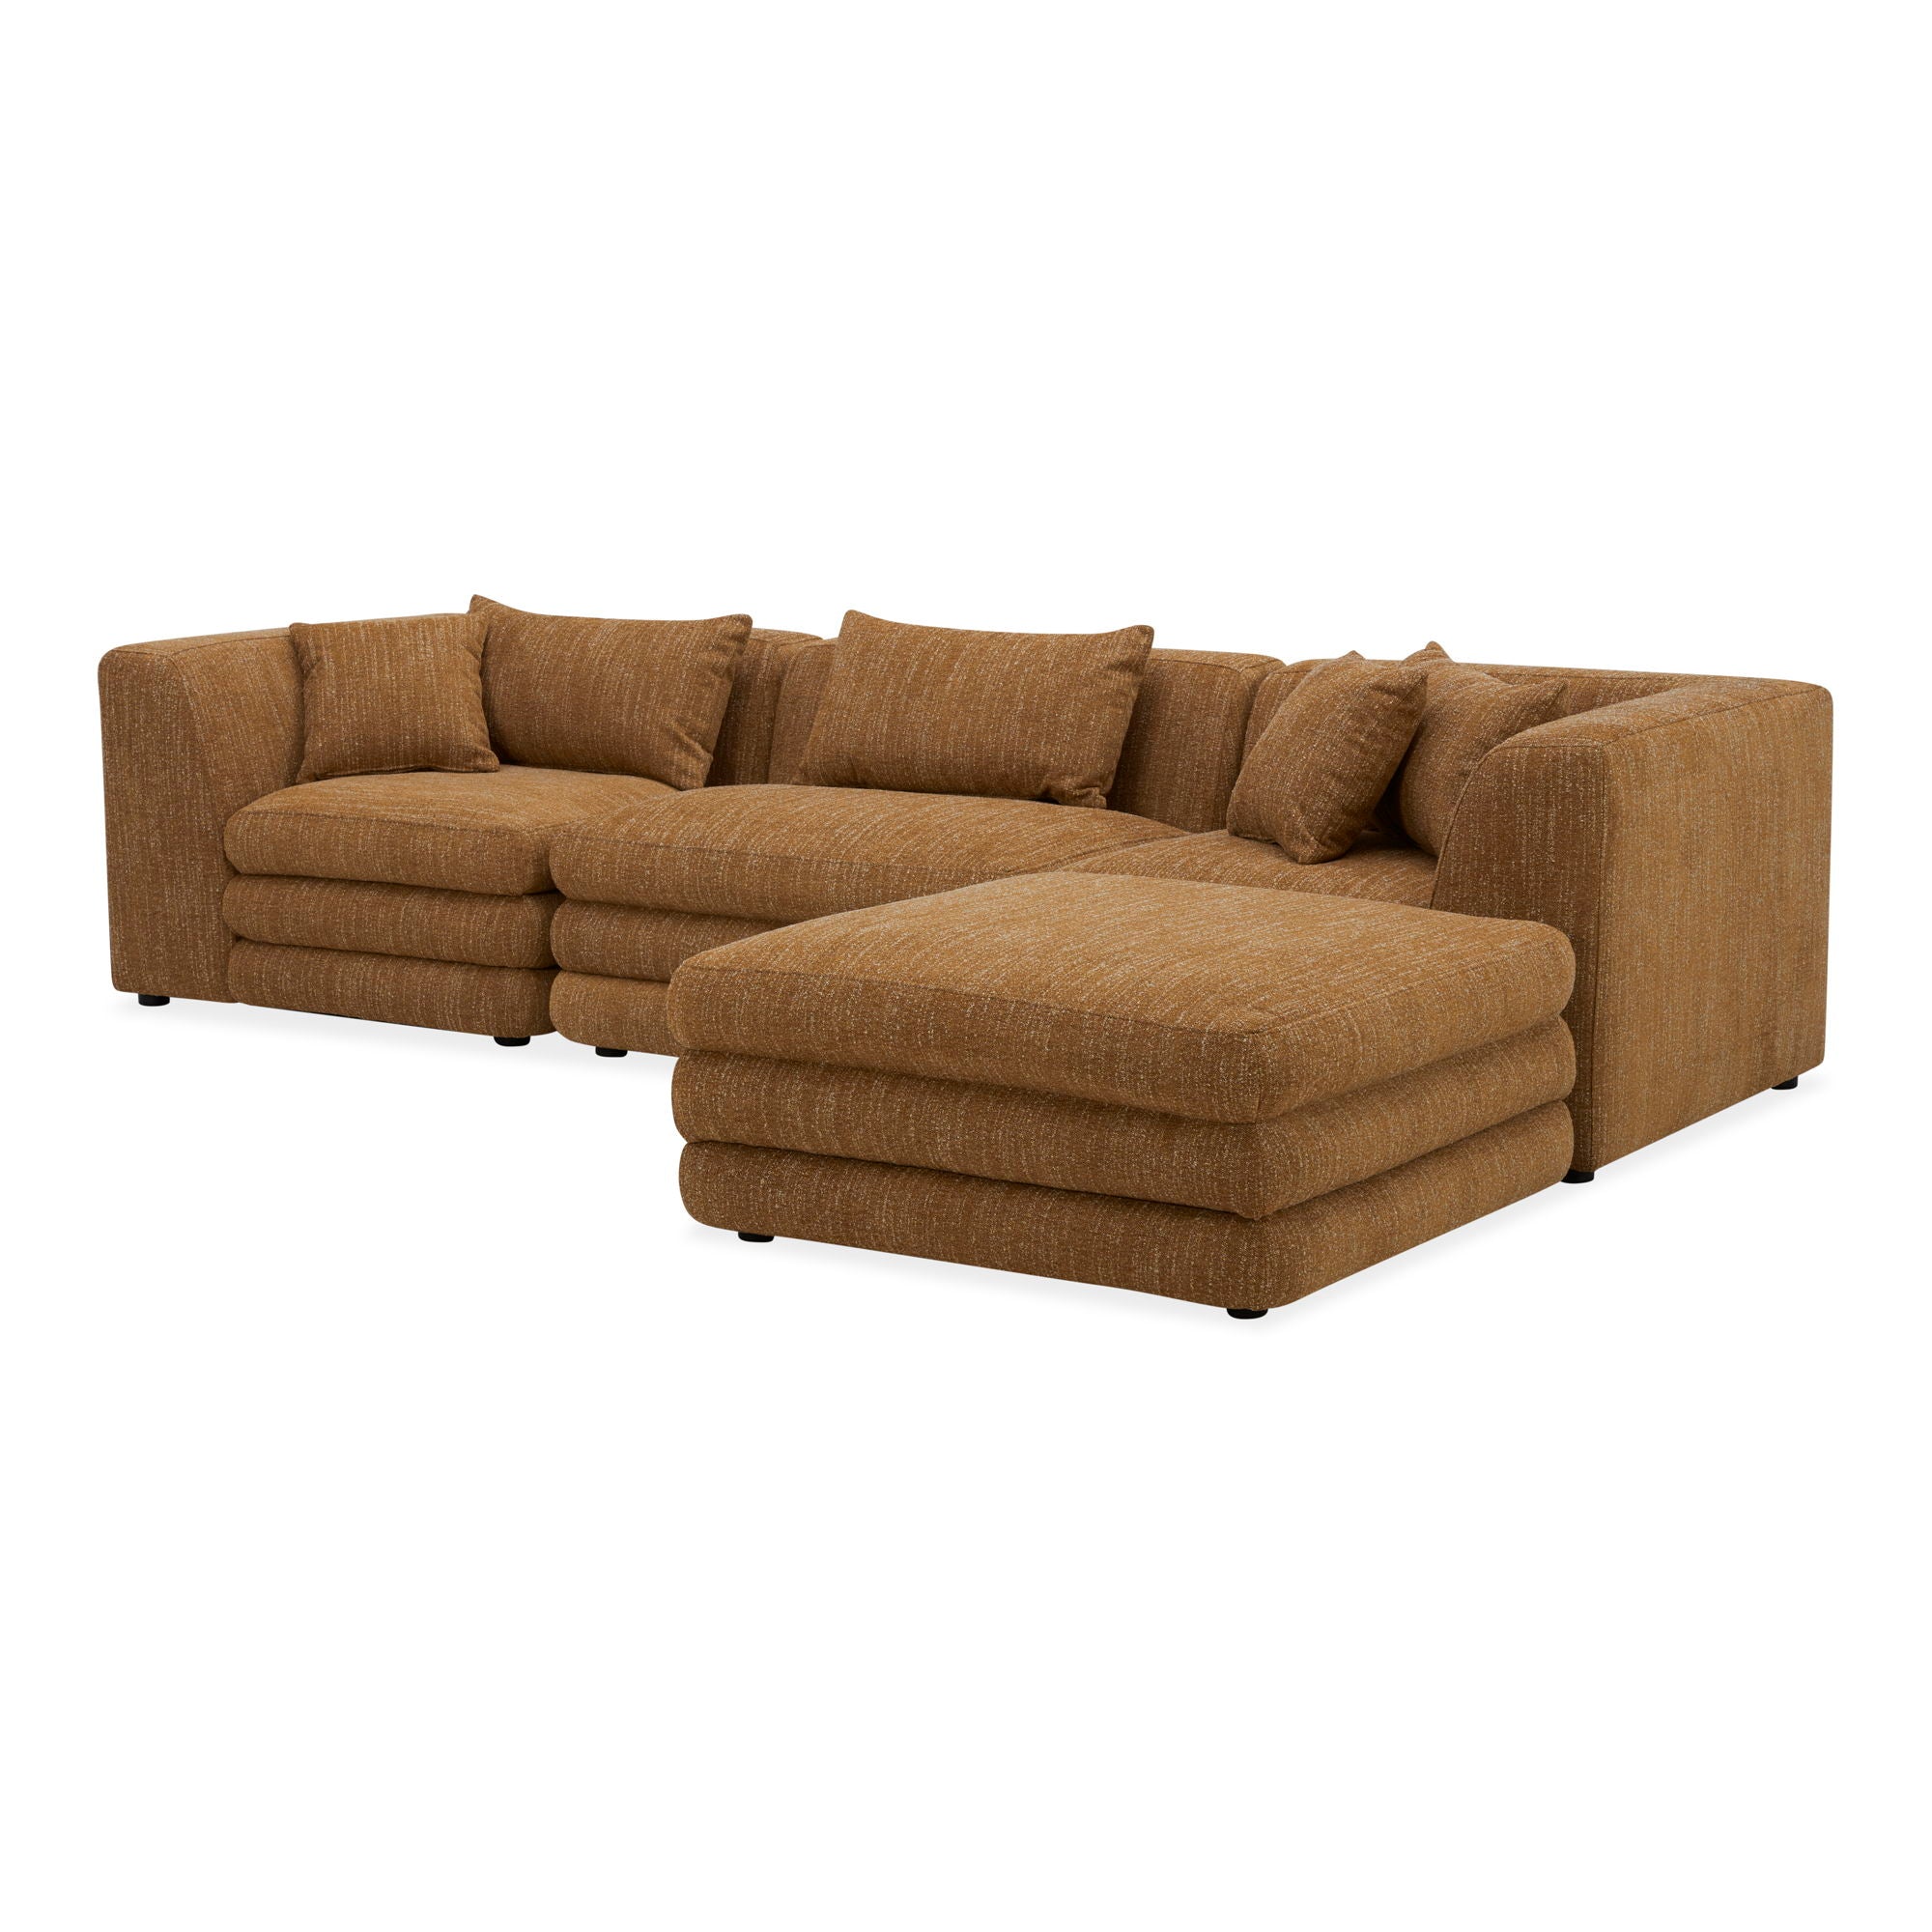 Lowtide - Lounge Modular Sectional - Amber Glow-Stationary Sectionals-American Furniture Outlet